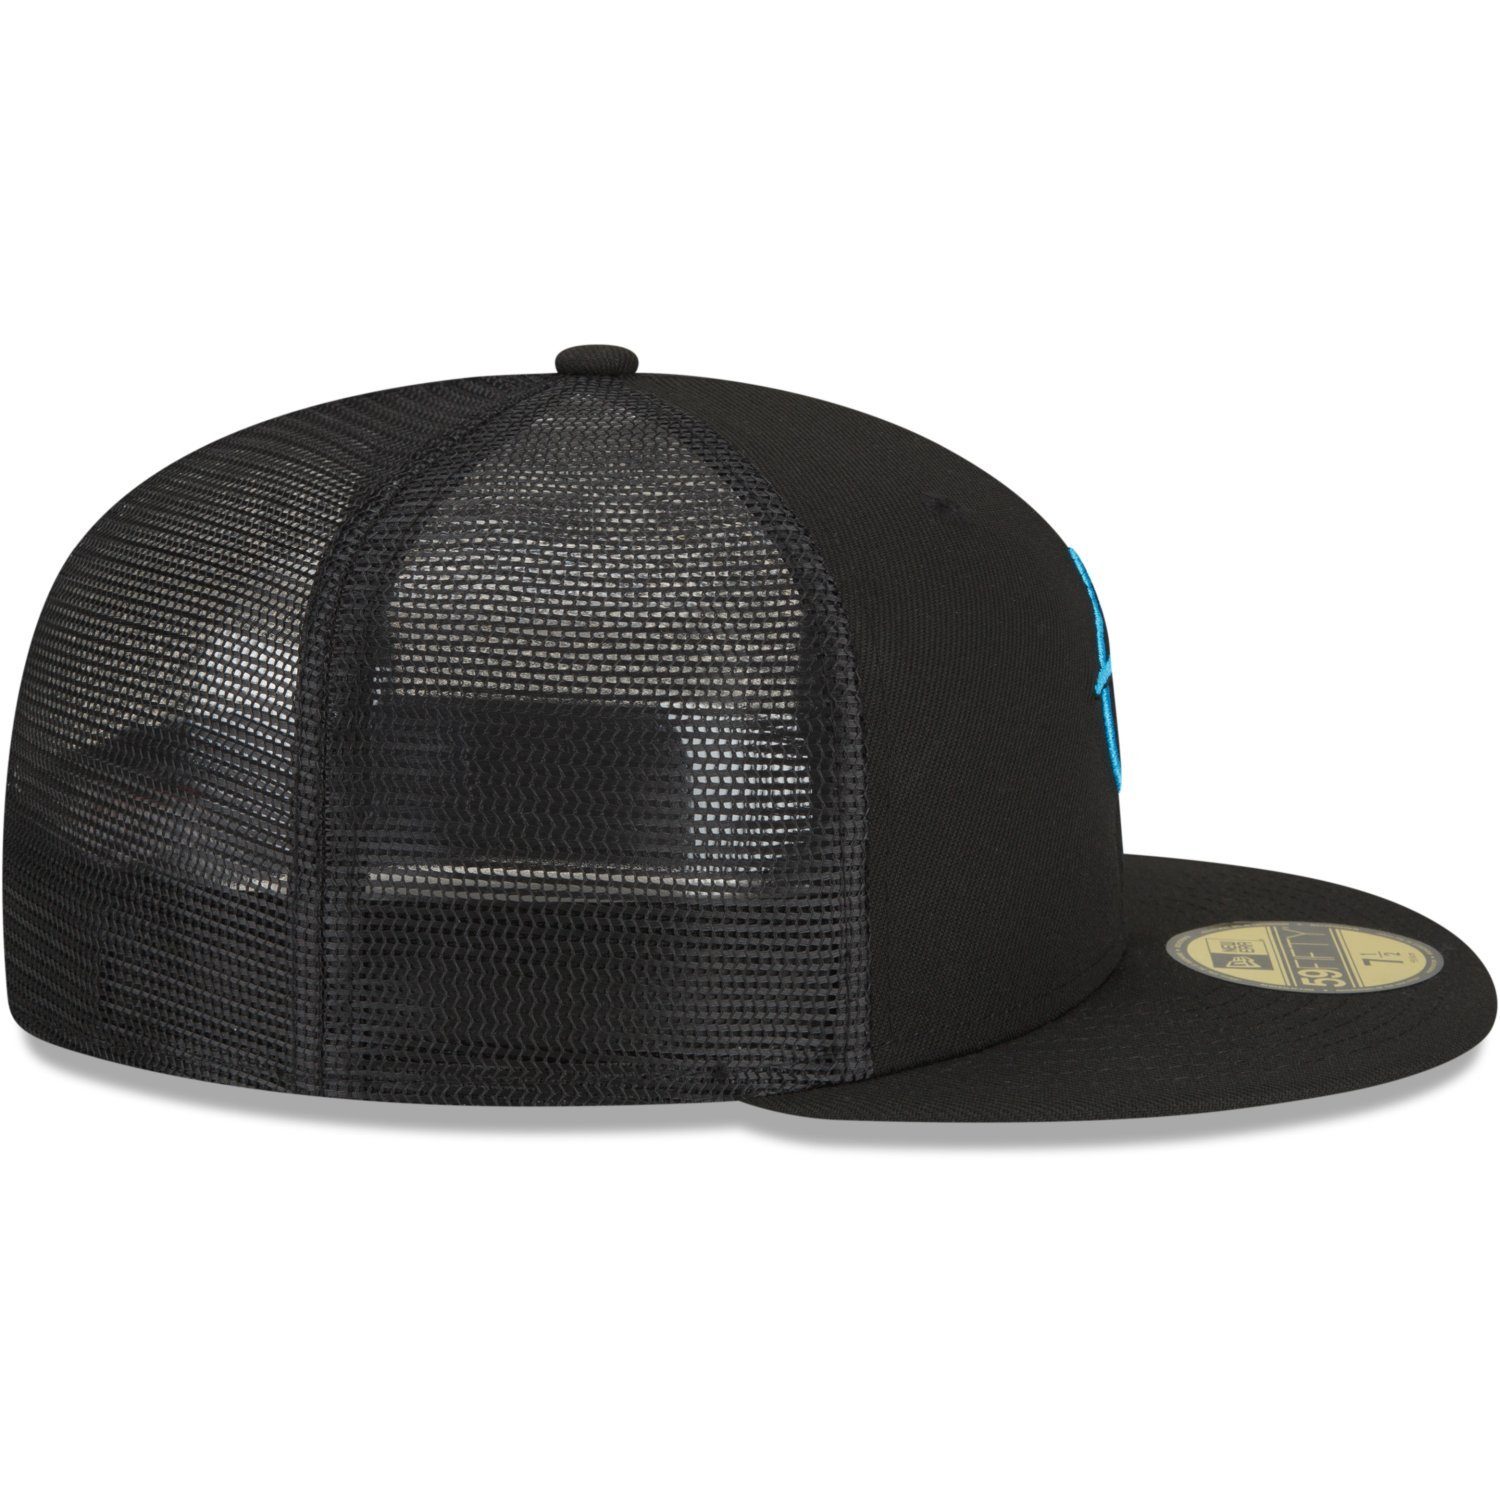 Cap 59Fifty Fitted PRACTICE Era New Miami BATTING Marlins